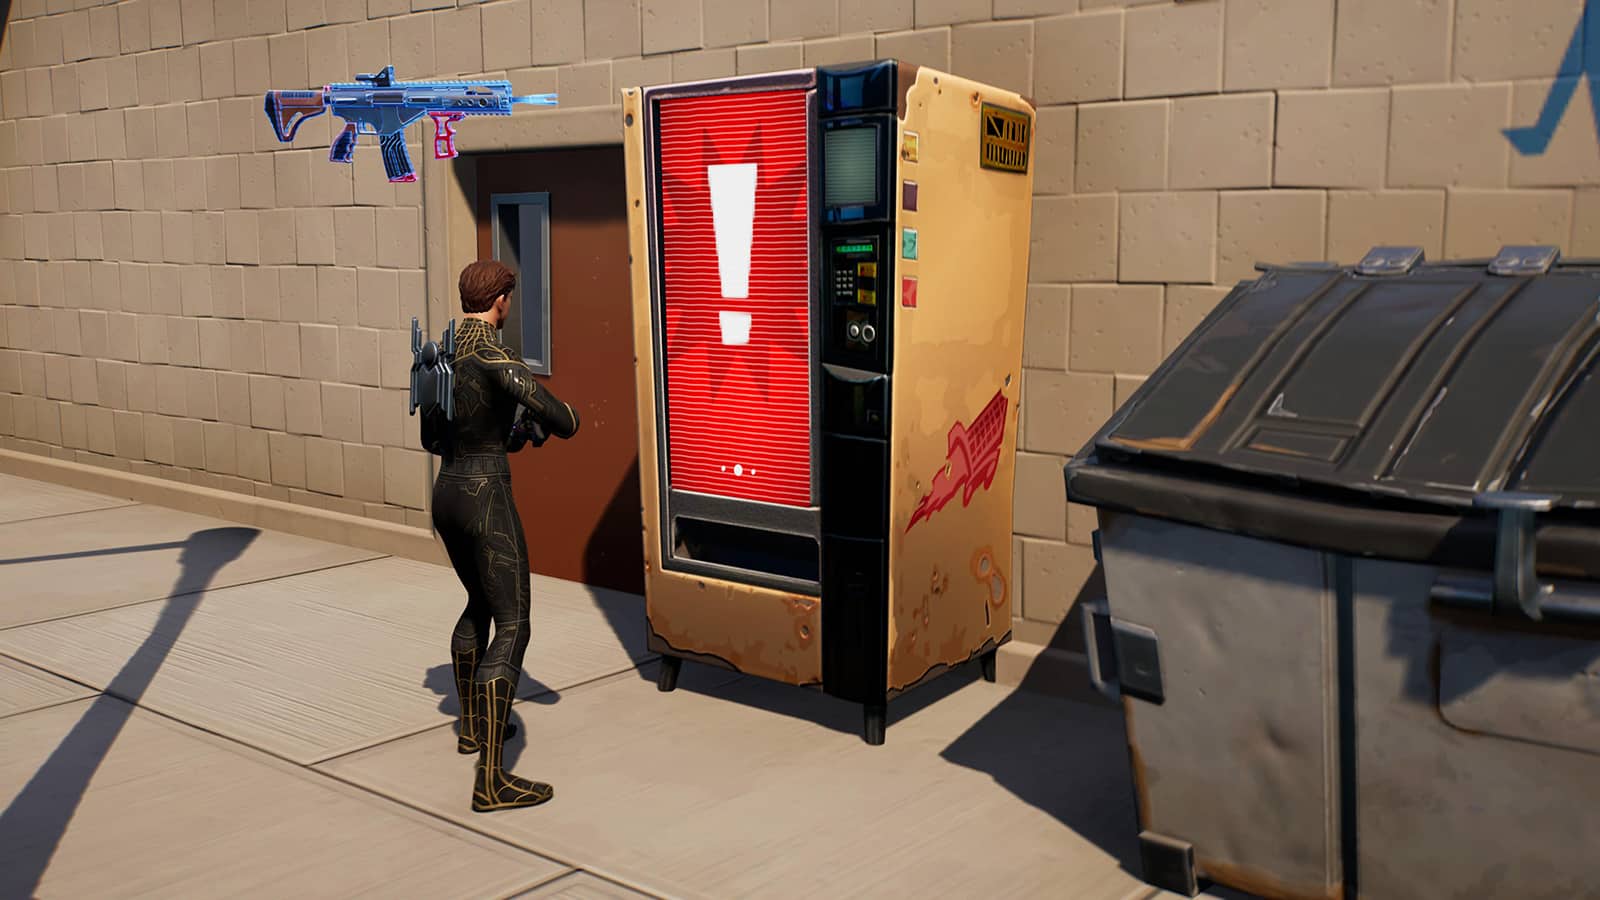 Spider-Man using a Malfunctioning Vending Machine location in Fortnite